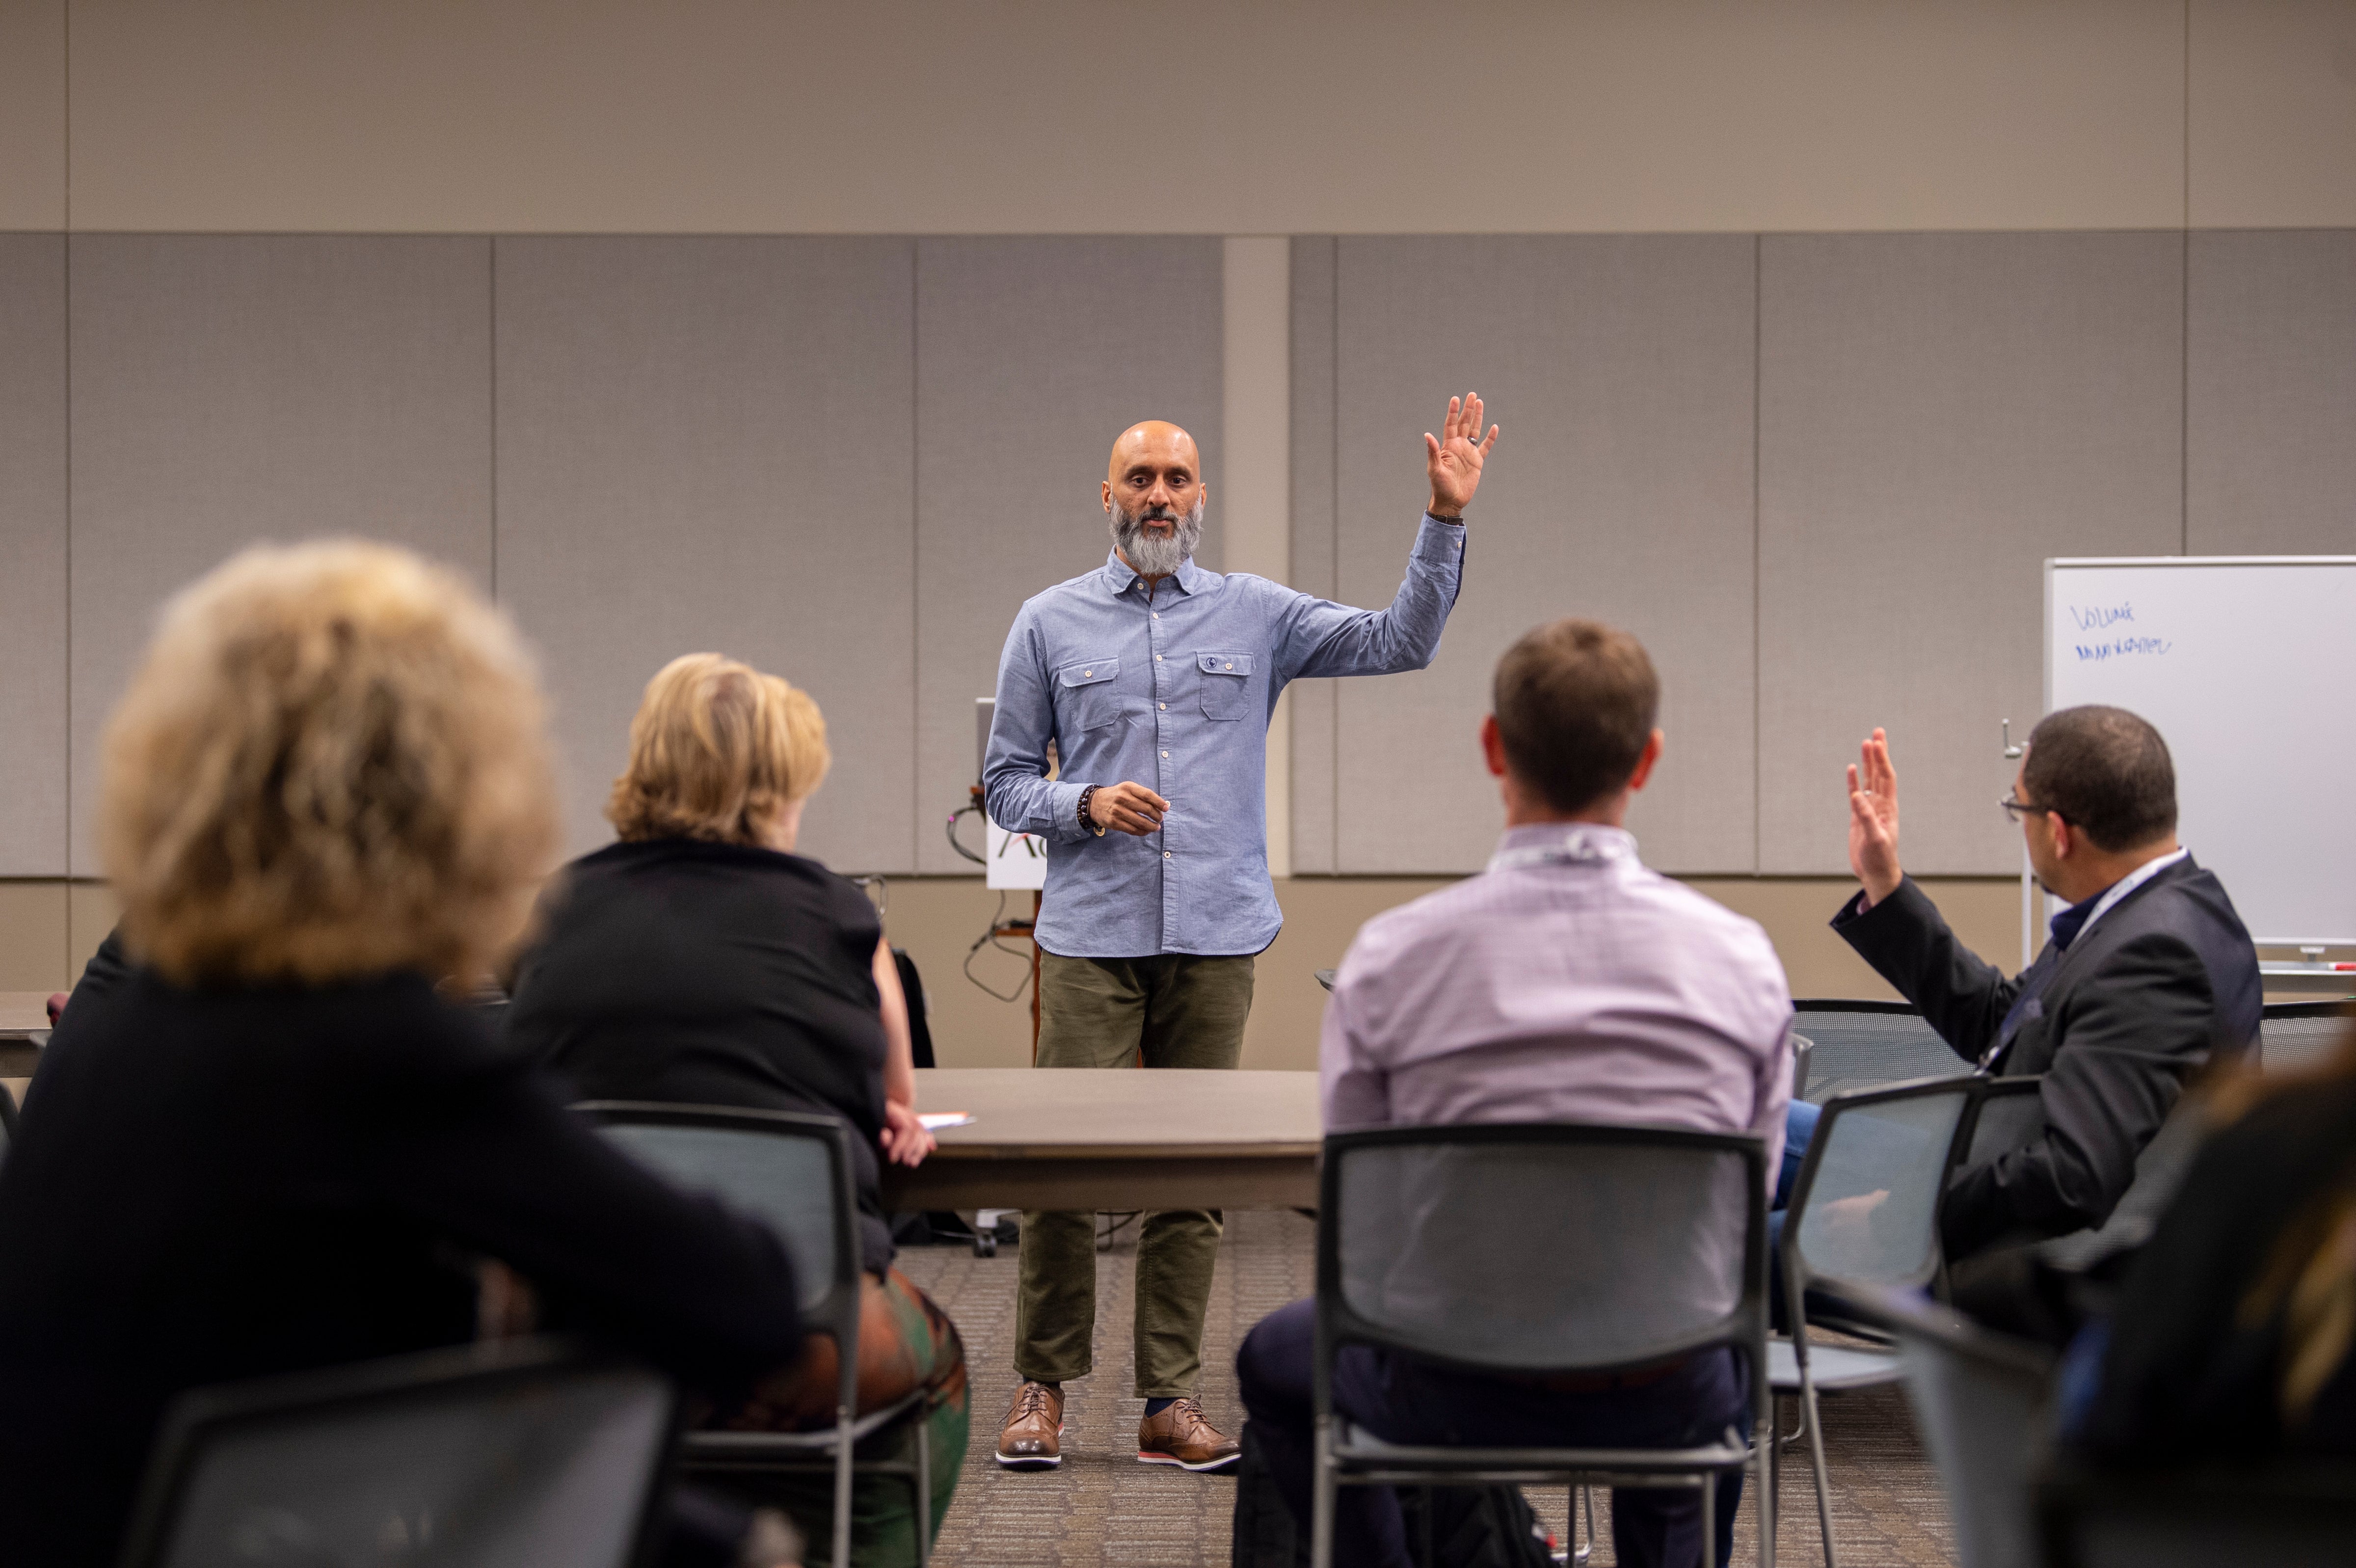 instructor raising hand asking question for attendees to also raise hand